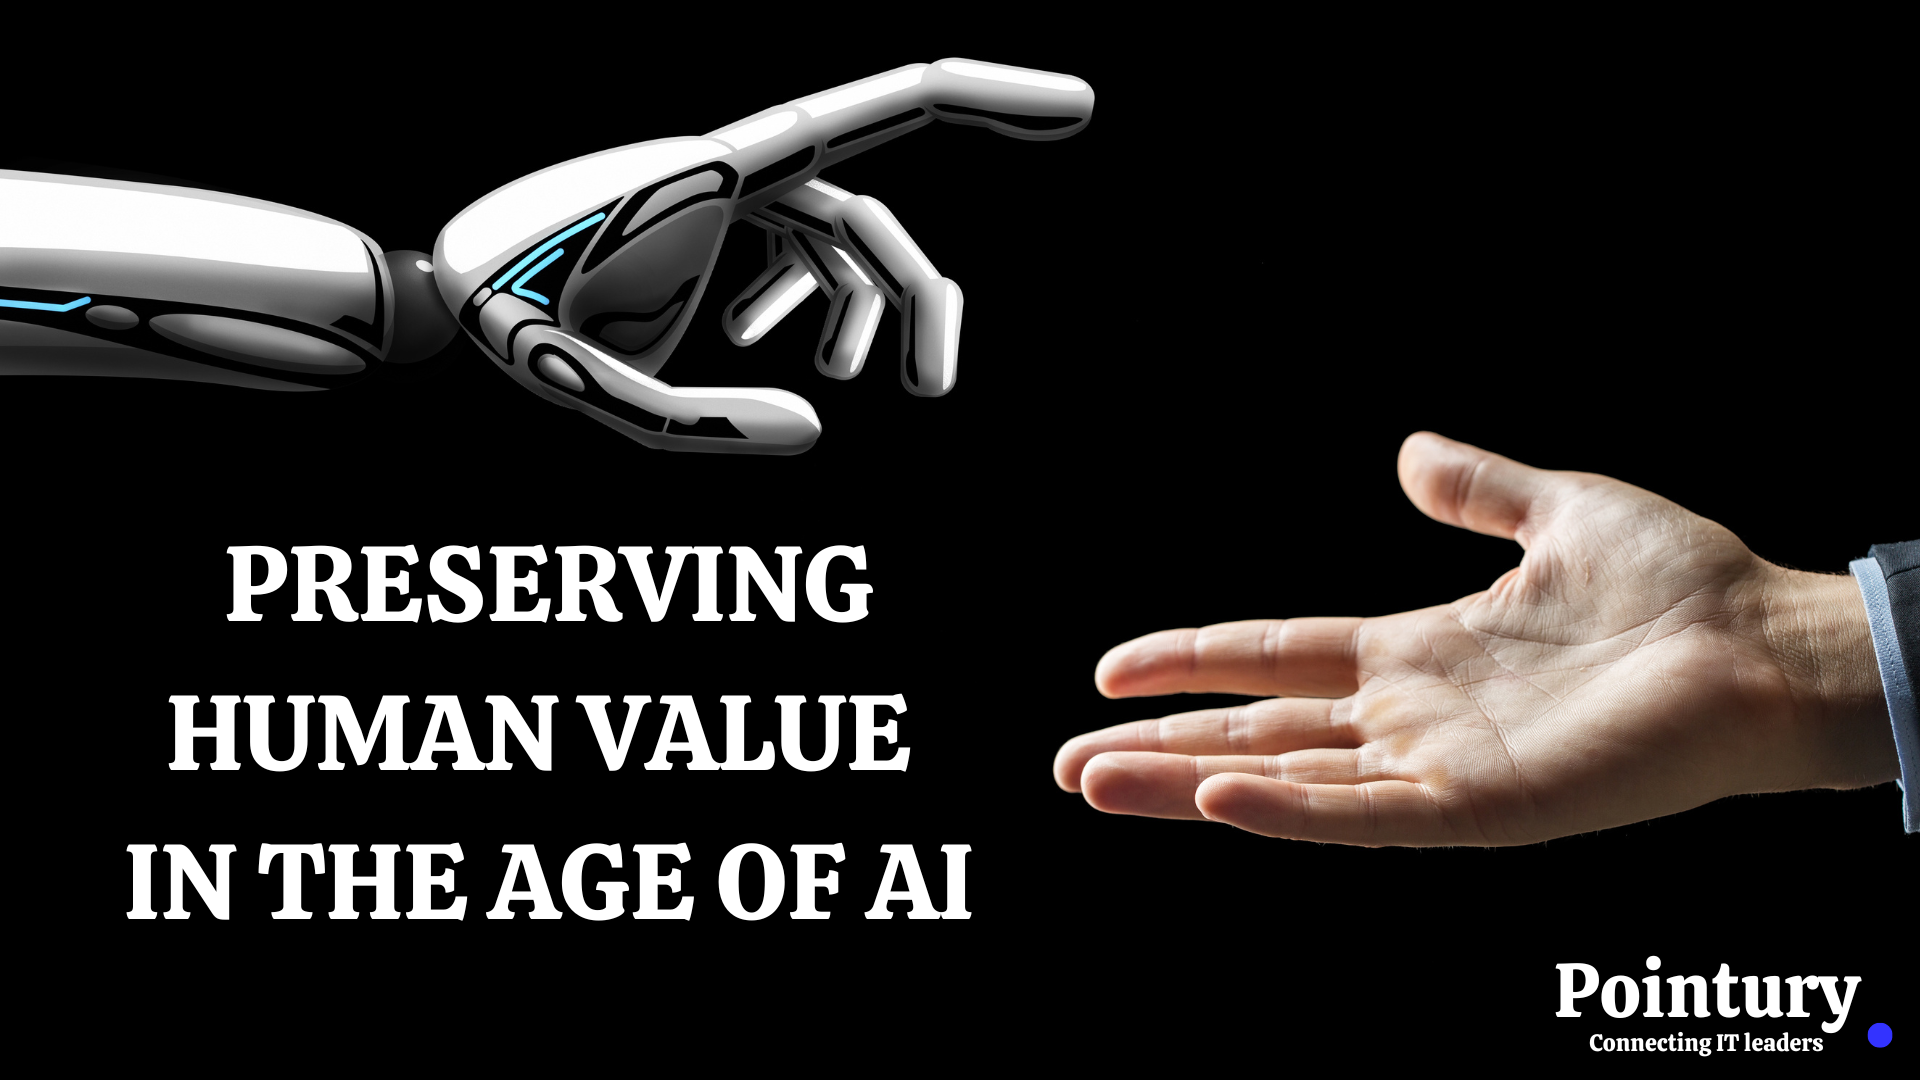 PRESERVING HUMAN VALUE IN THE AGE OF AI